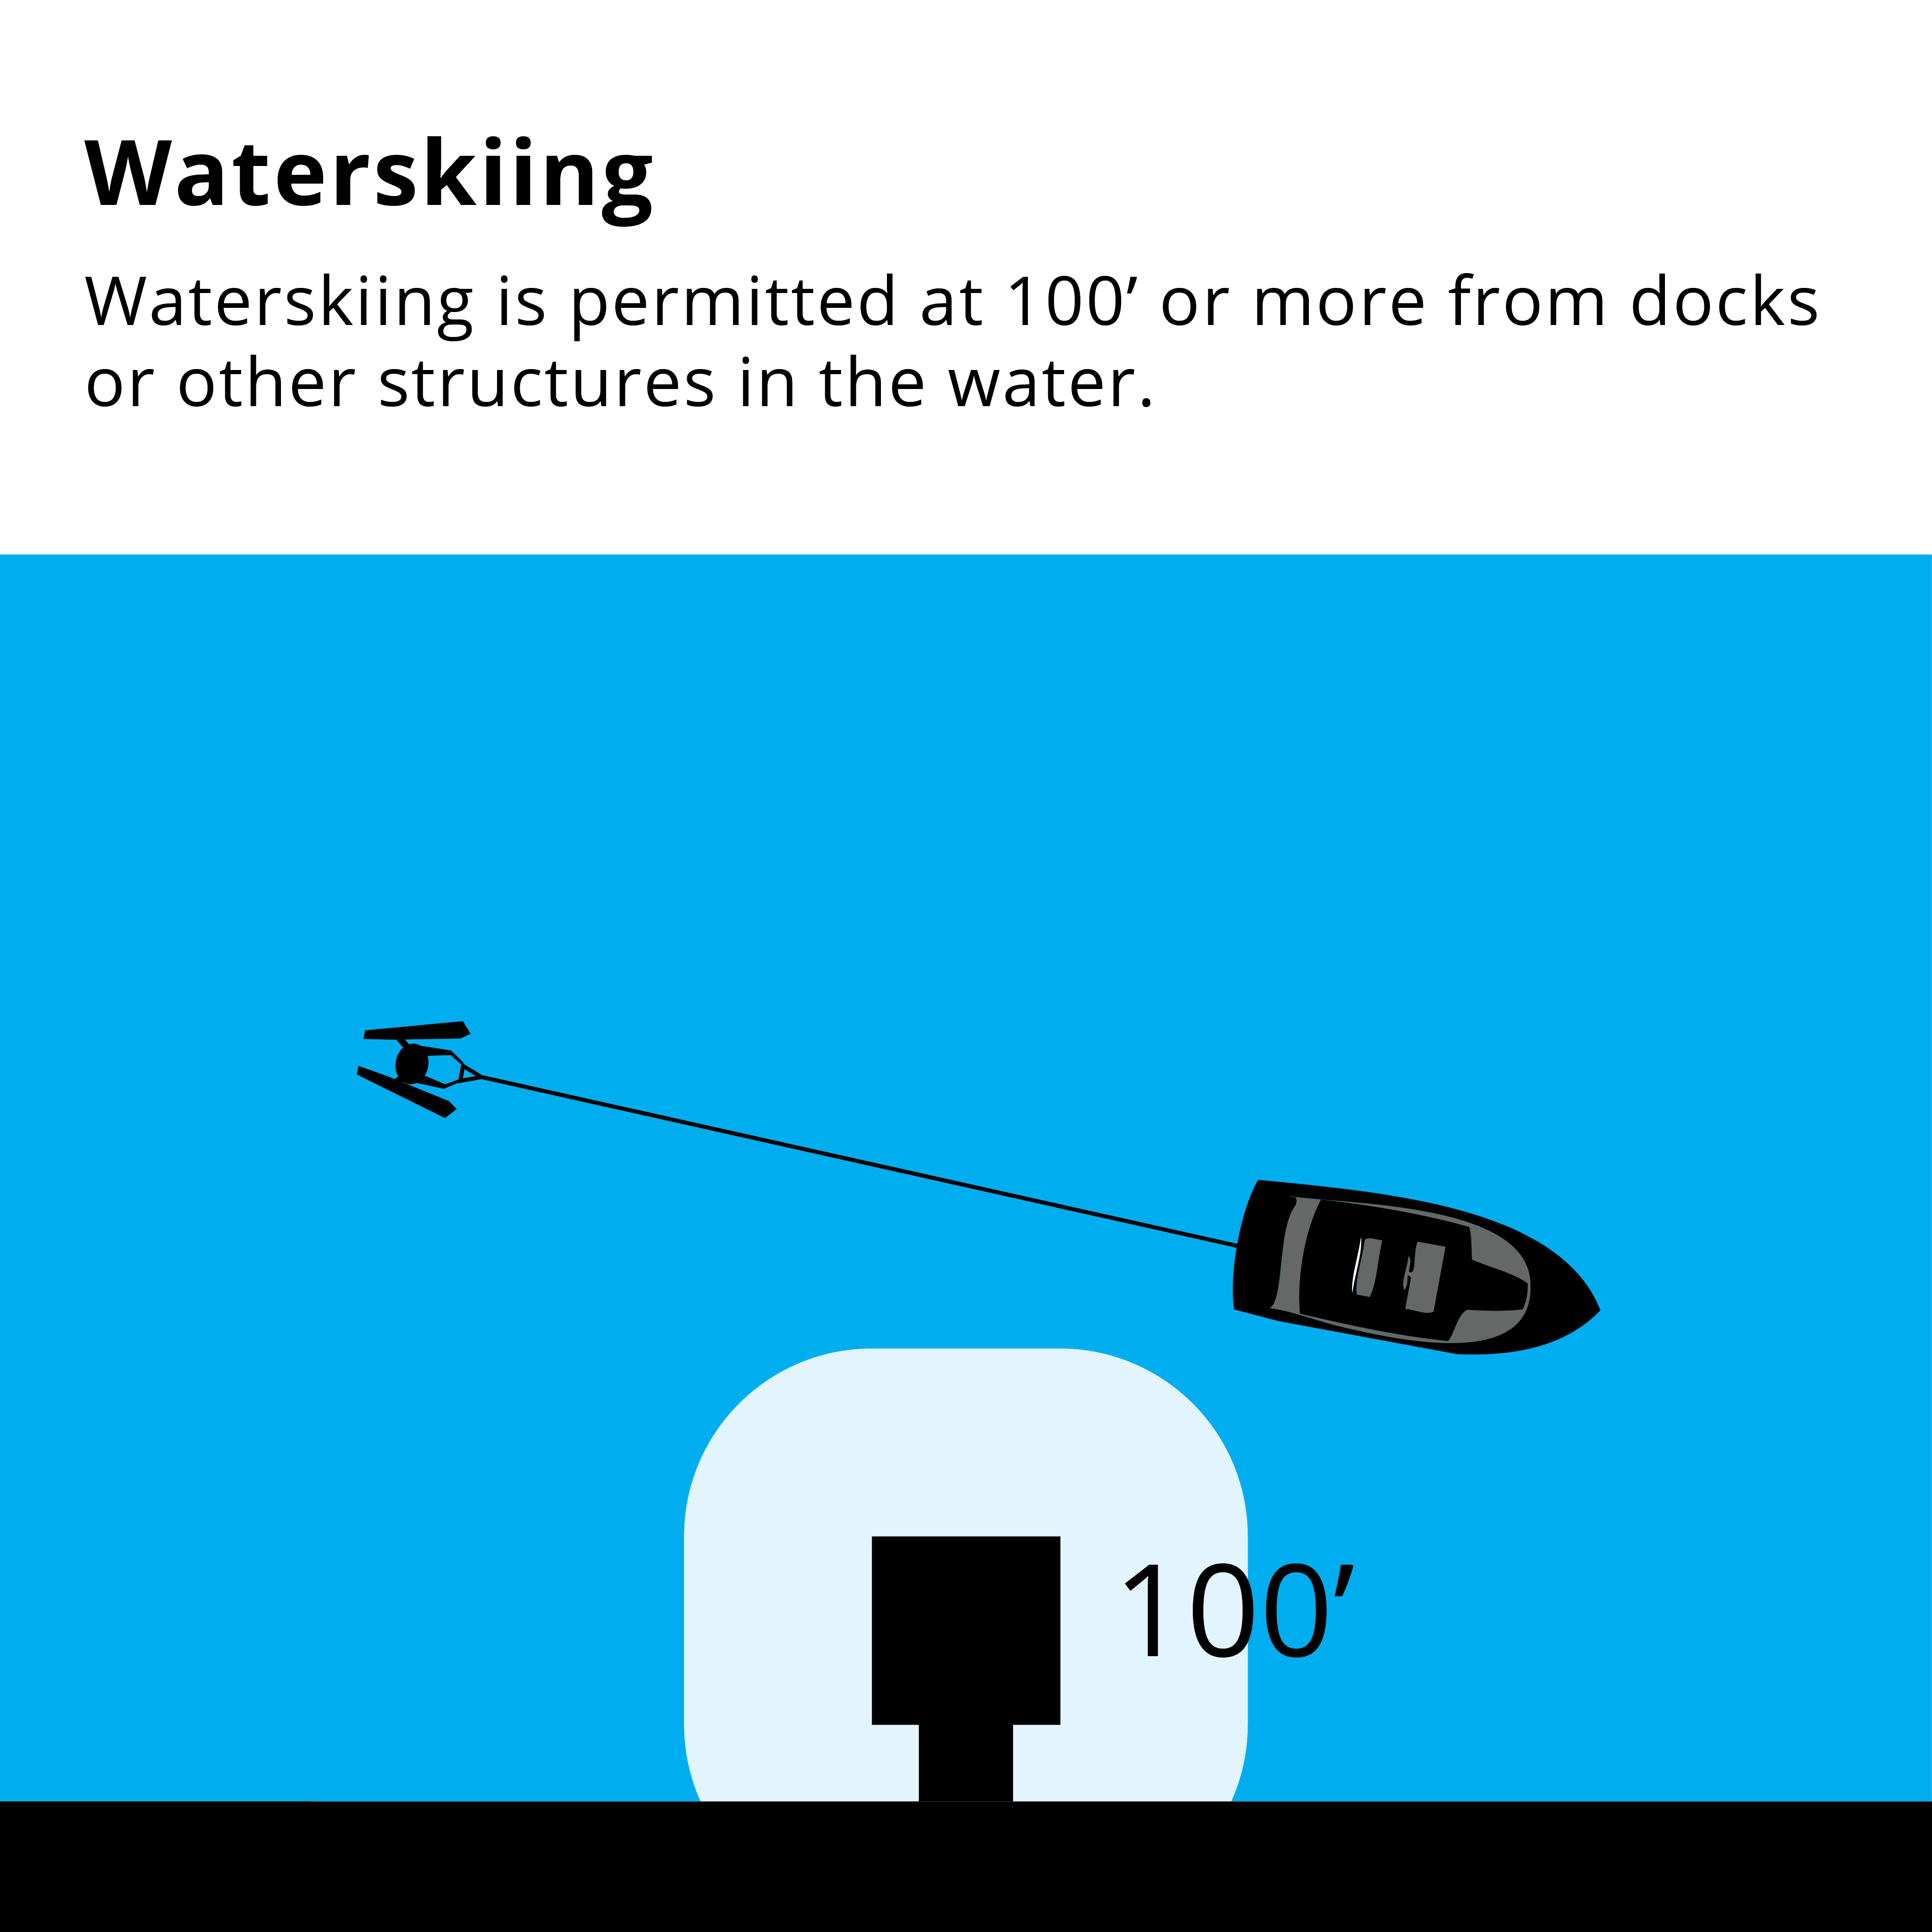 Waterskiing is allowed 100 feet or more from docks or other structures